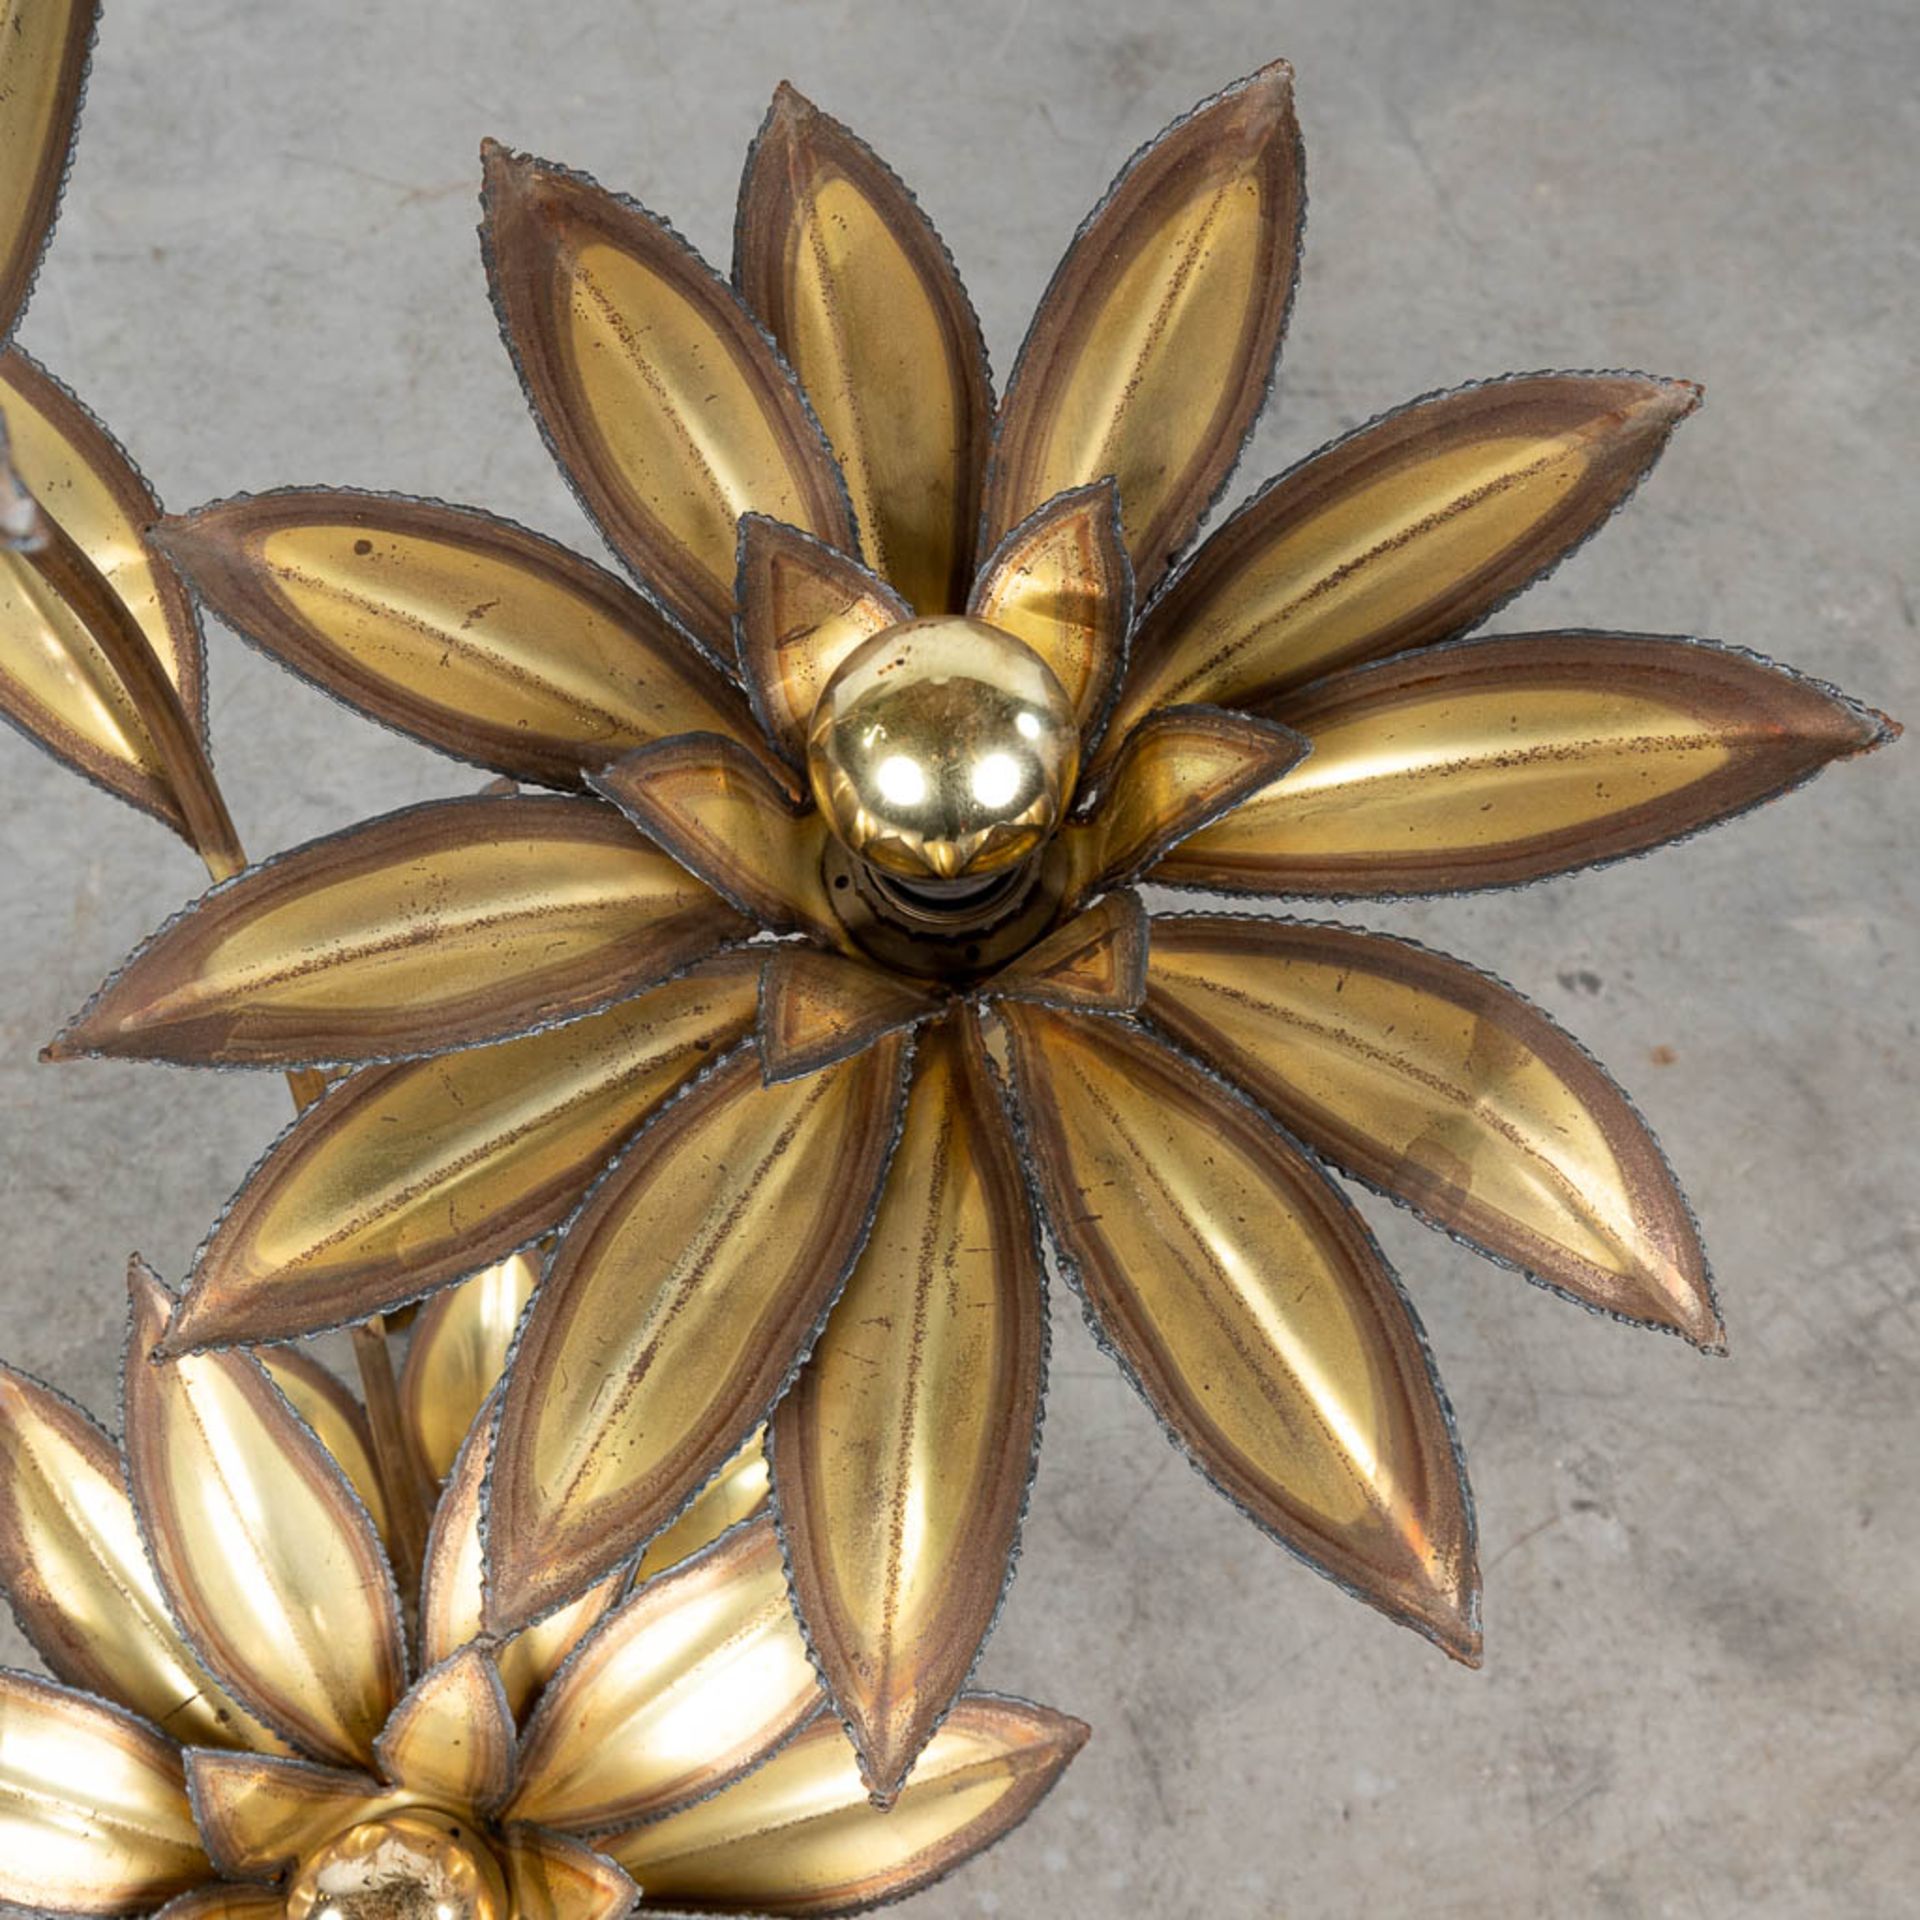 Maison Janssen, a table lamp made of metal flowers. (L:57 x W:68 x H:112 cm) - Image 11 of 15